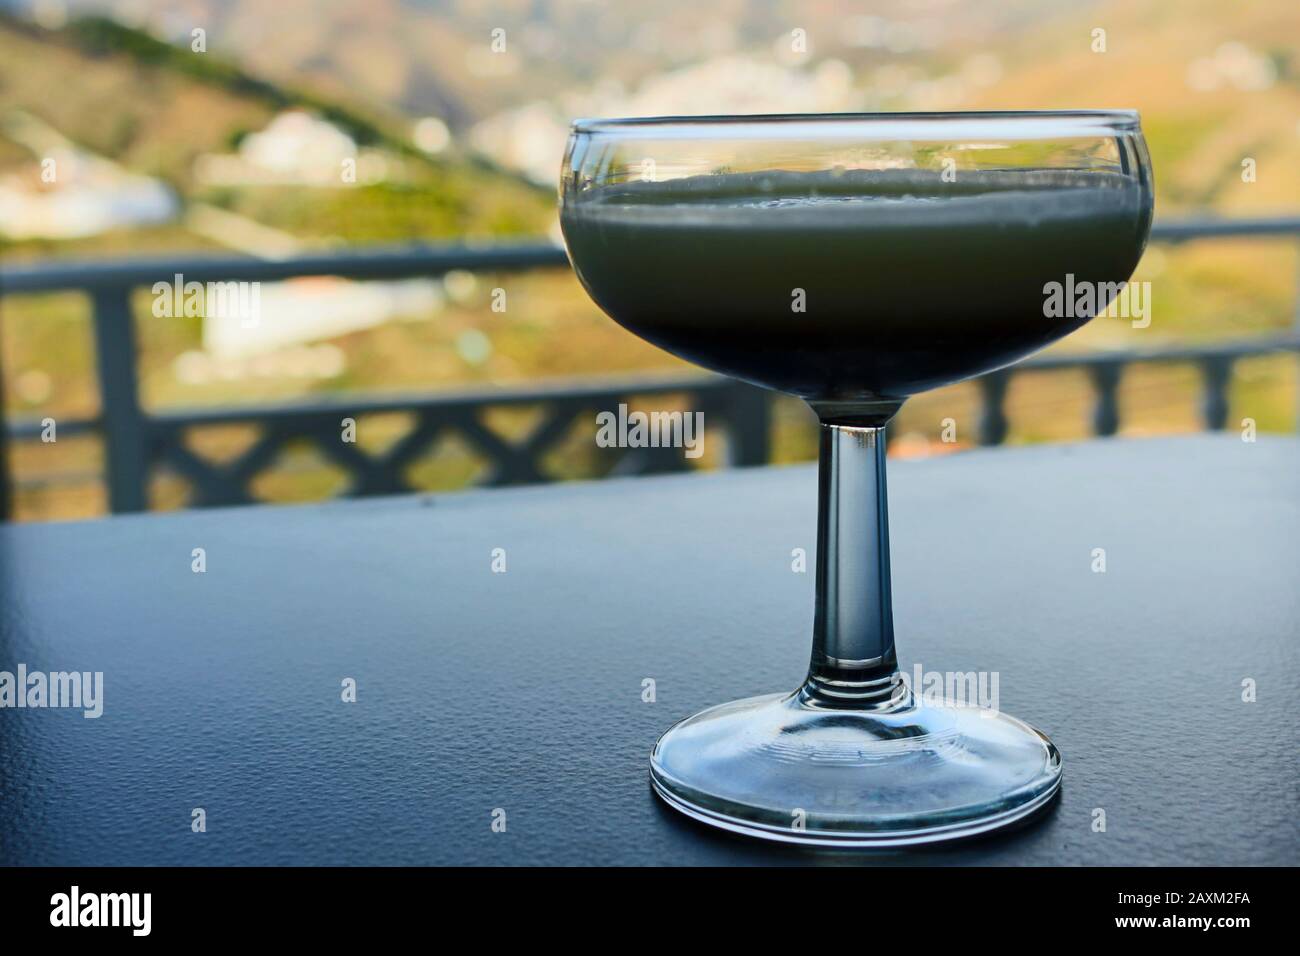 Take this drink in a hotel or on the balcony of your house while you relax.  You can also take it in a restaurant and celebrate an event. Stock Photo